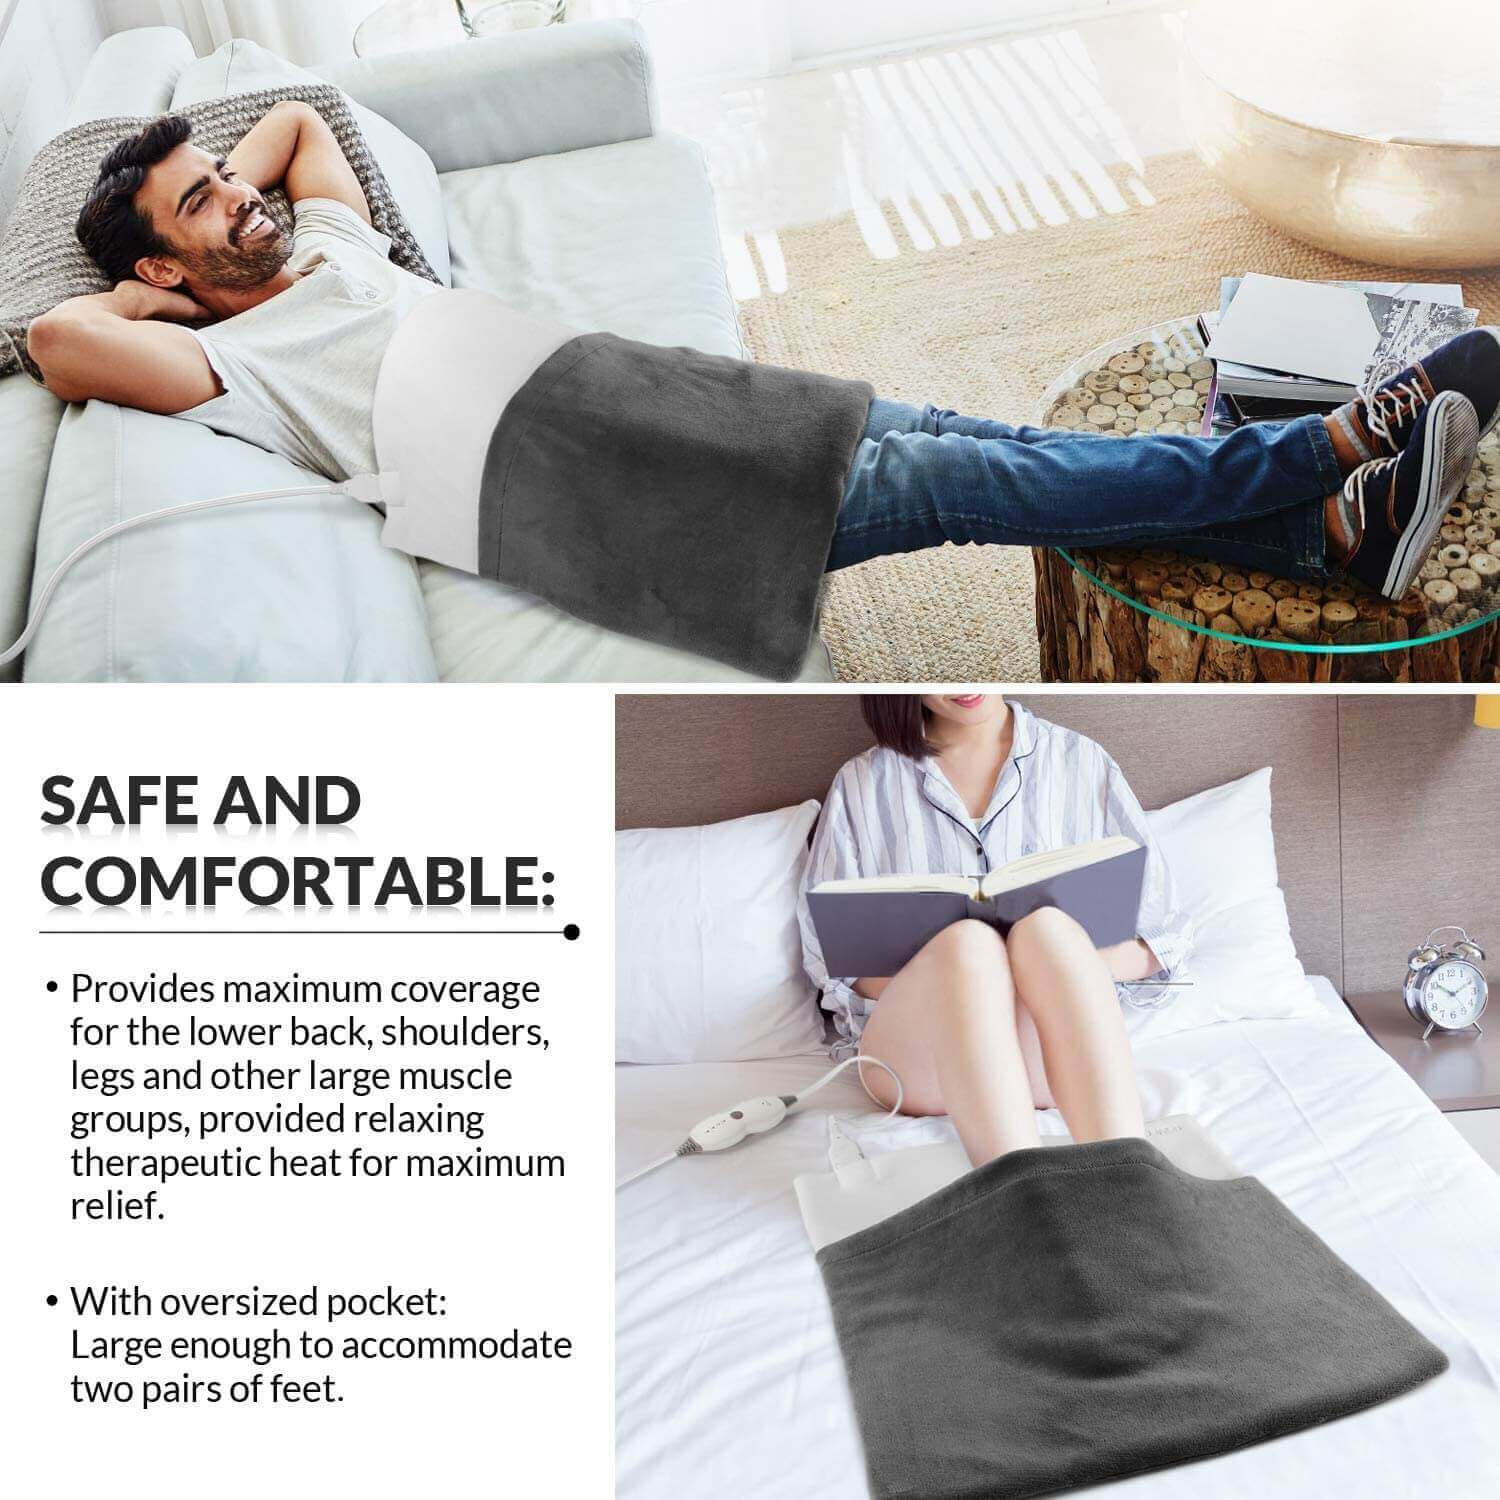 DONECO King Size Heating Pad (22 x 22 in), Electric Foot Warmer with 4 Temperature Settings and Fast-Heating Technology - safe and comfortable